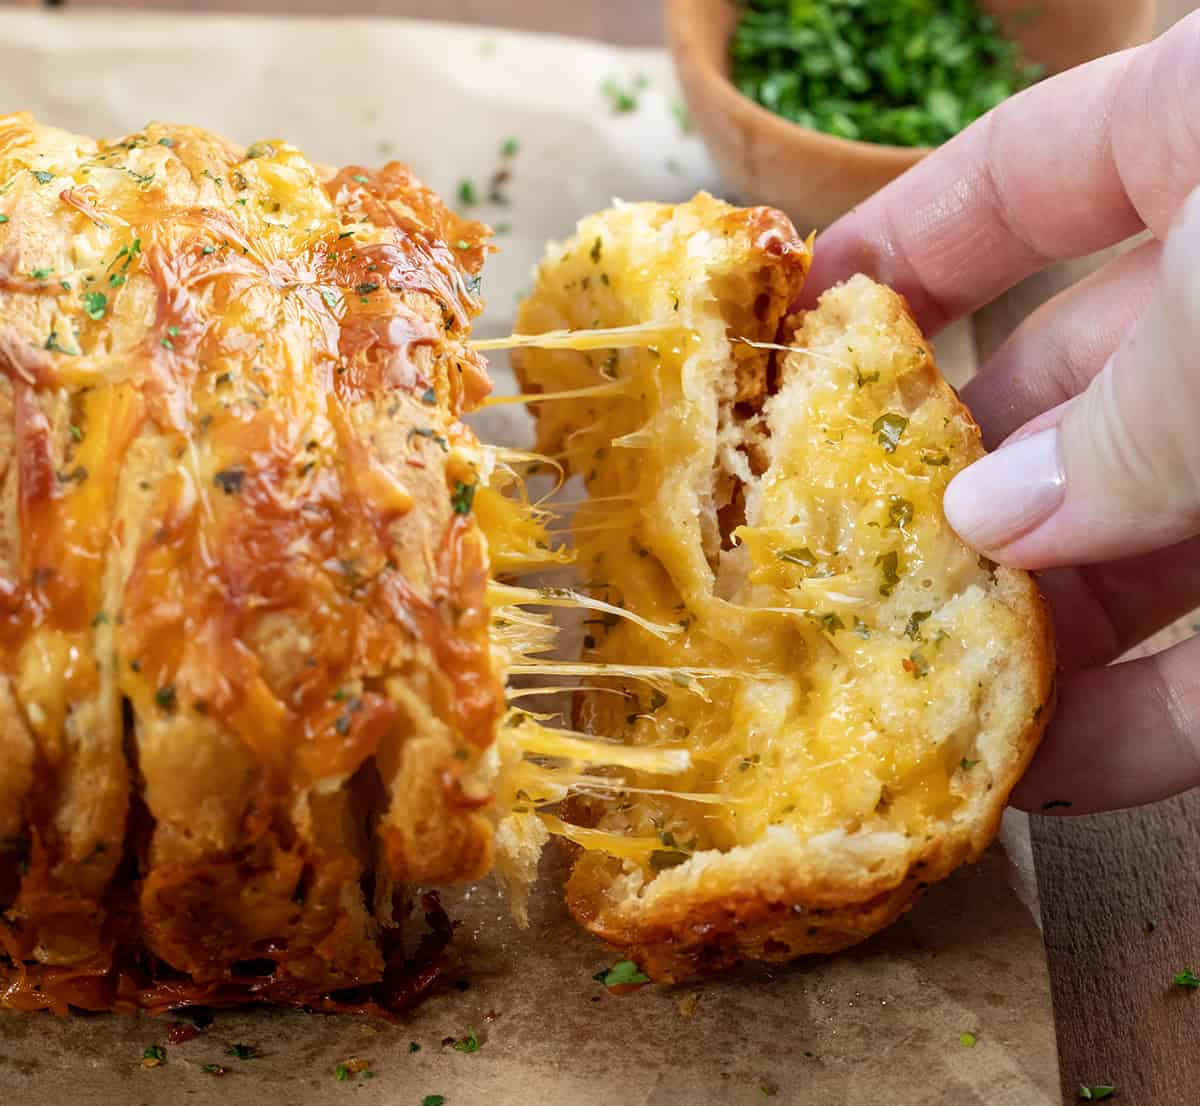 Pulling off a piece of Cheesy Garlic Pull-Apart Bread from the loaf.